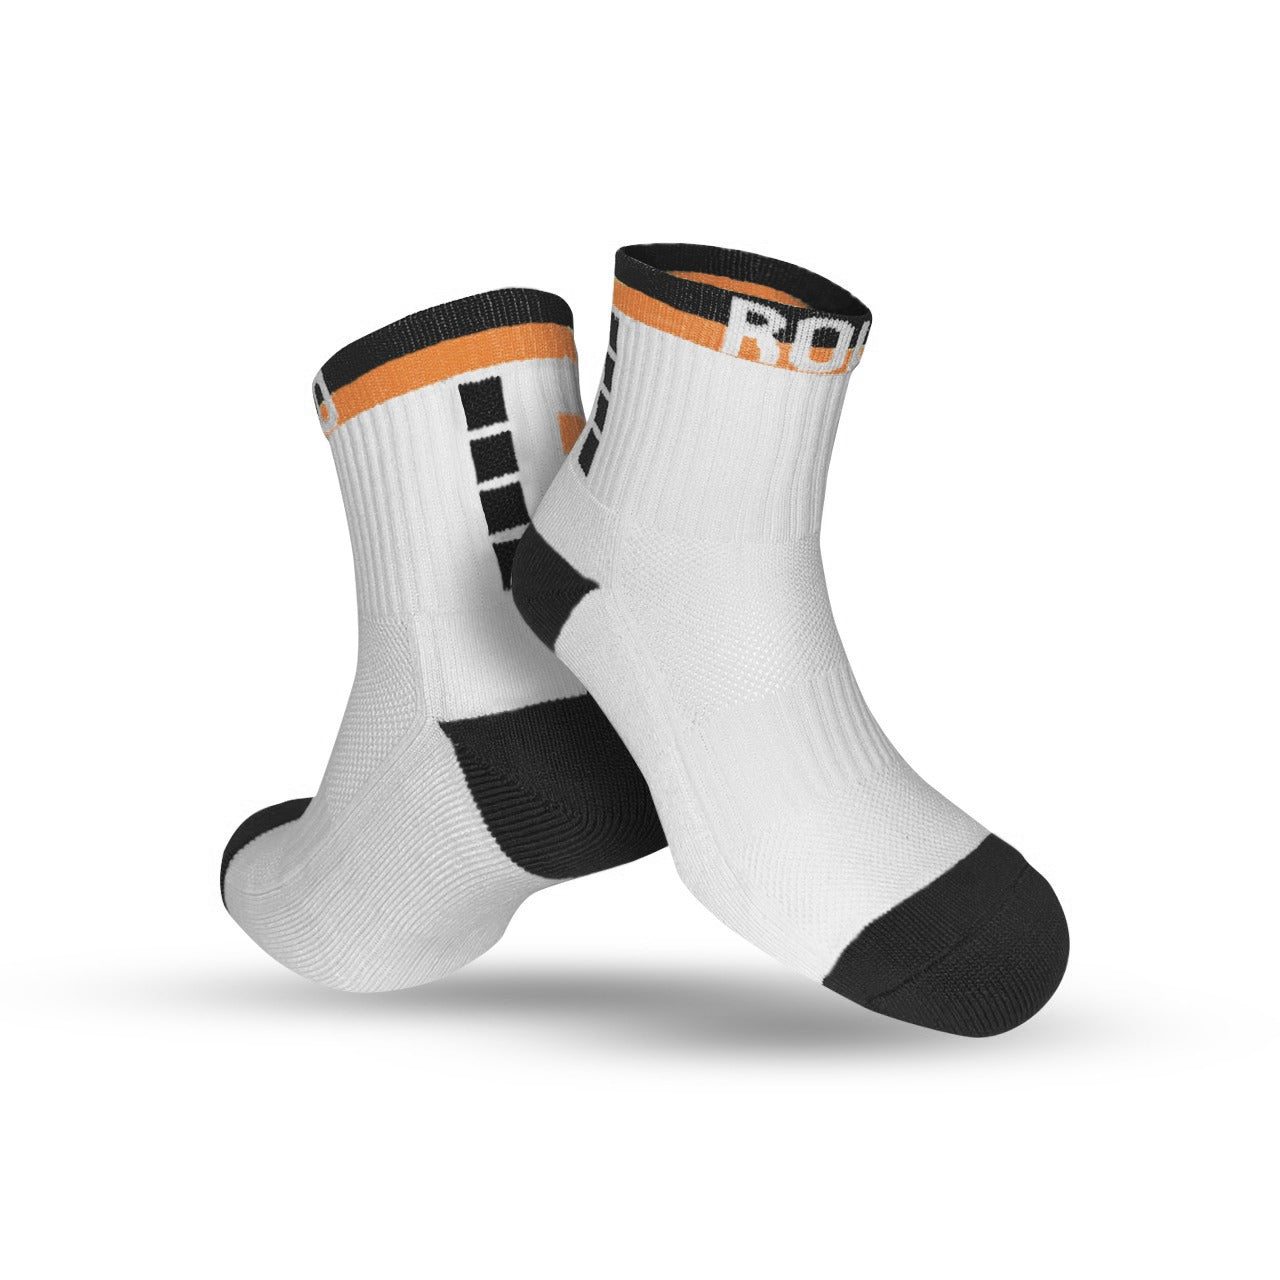 Low Rise Cushioned Ankle Socks - Black/Amber/White